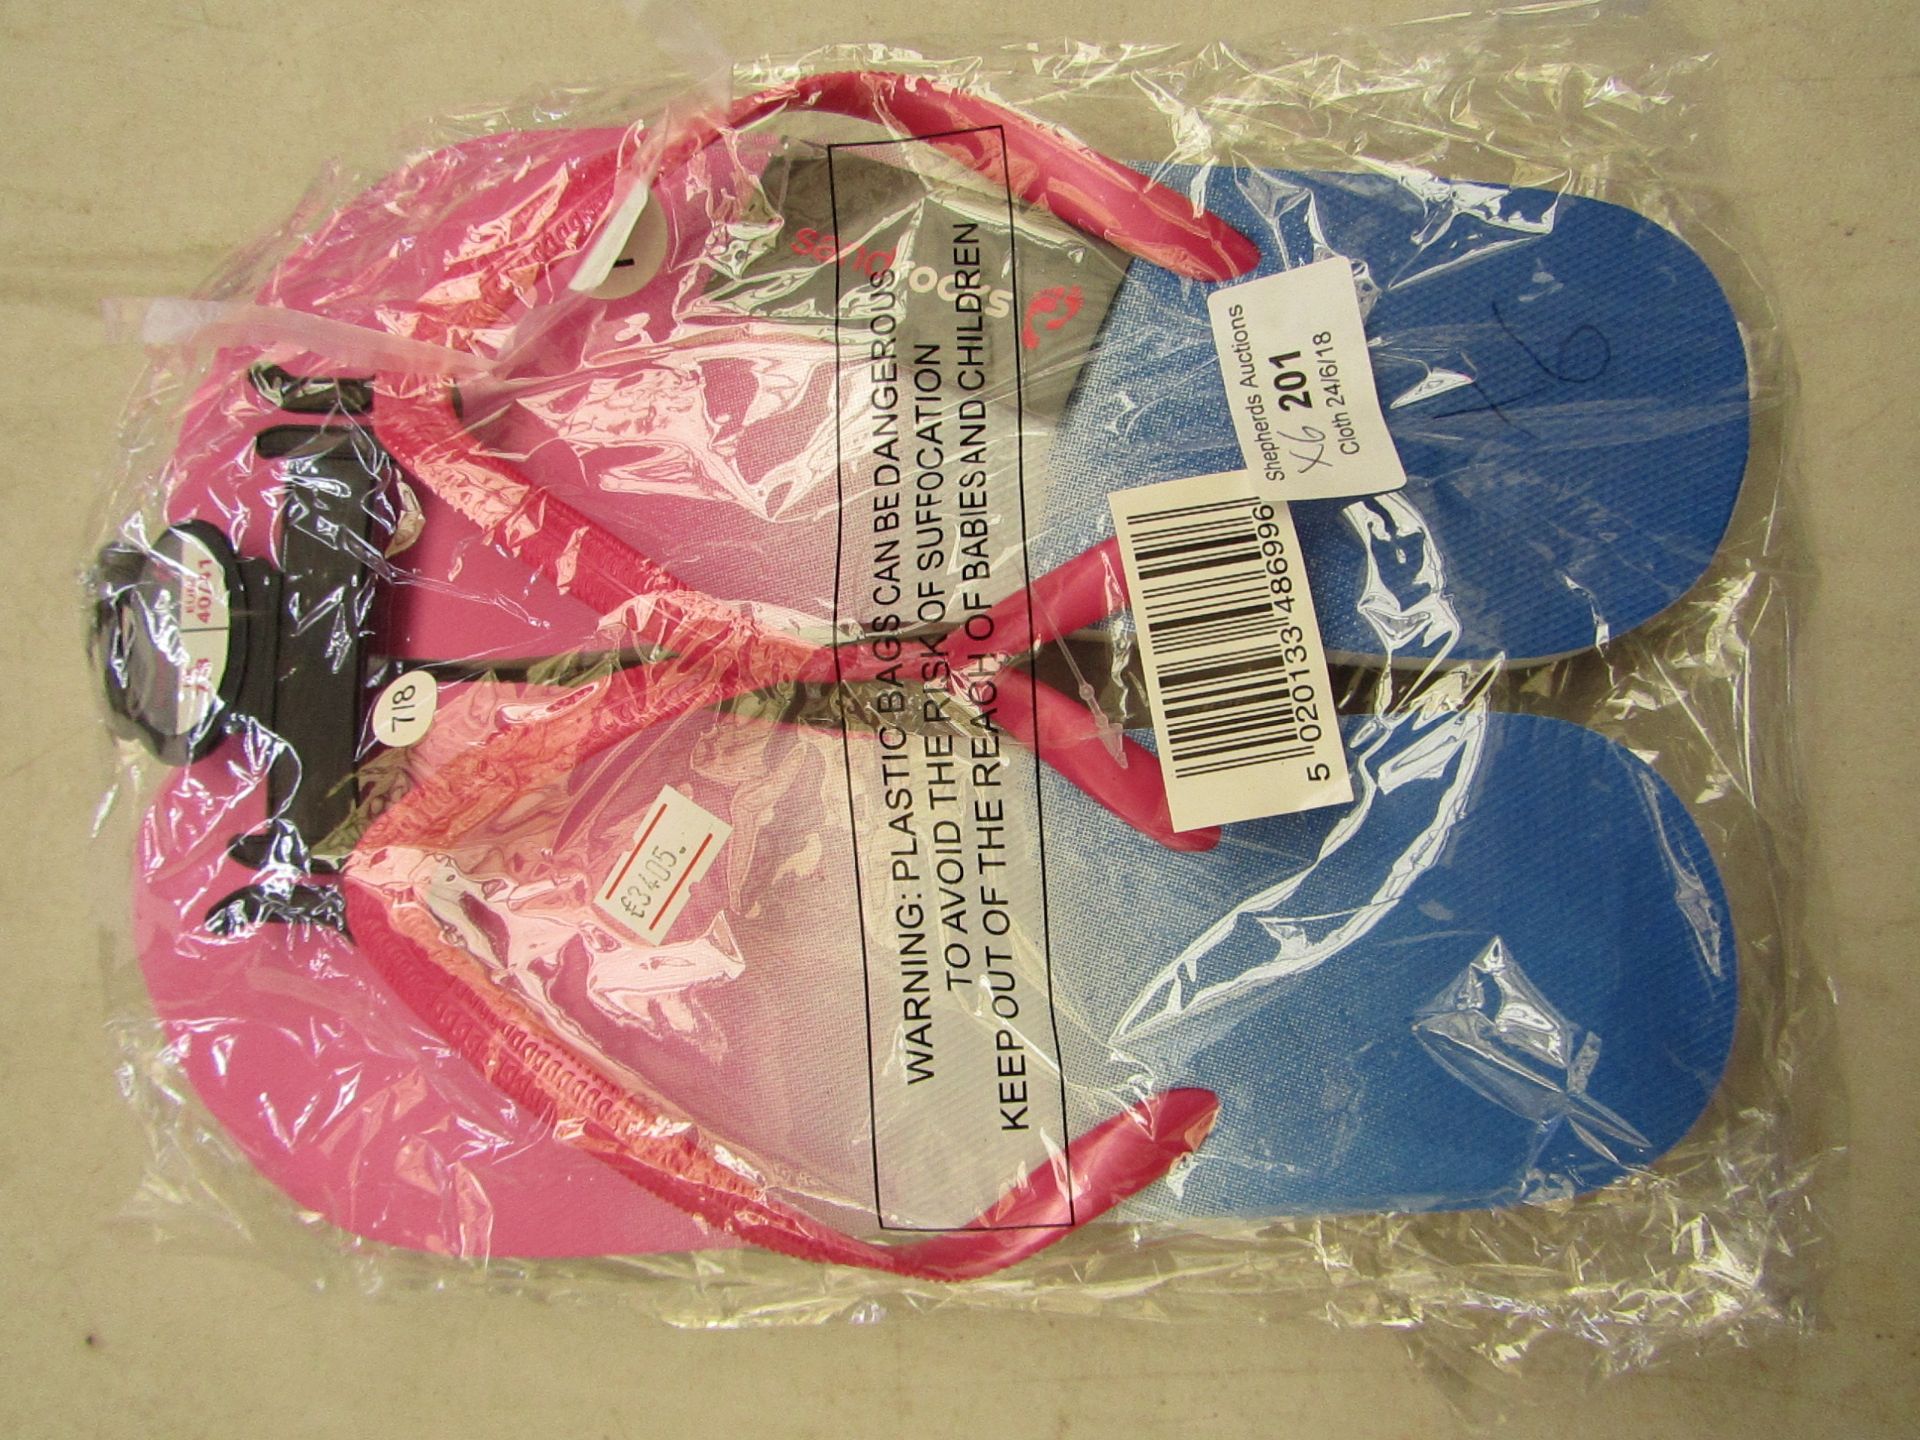 6 X Sandrock Flipflops pink/blue all size 7-8 all new in packaging